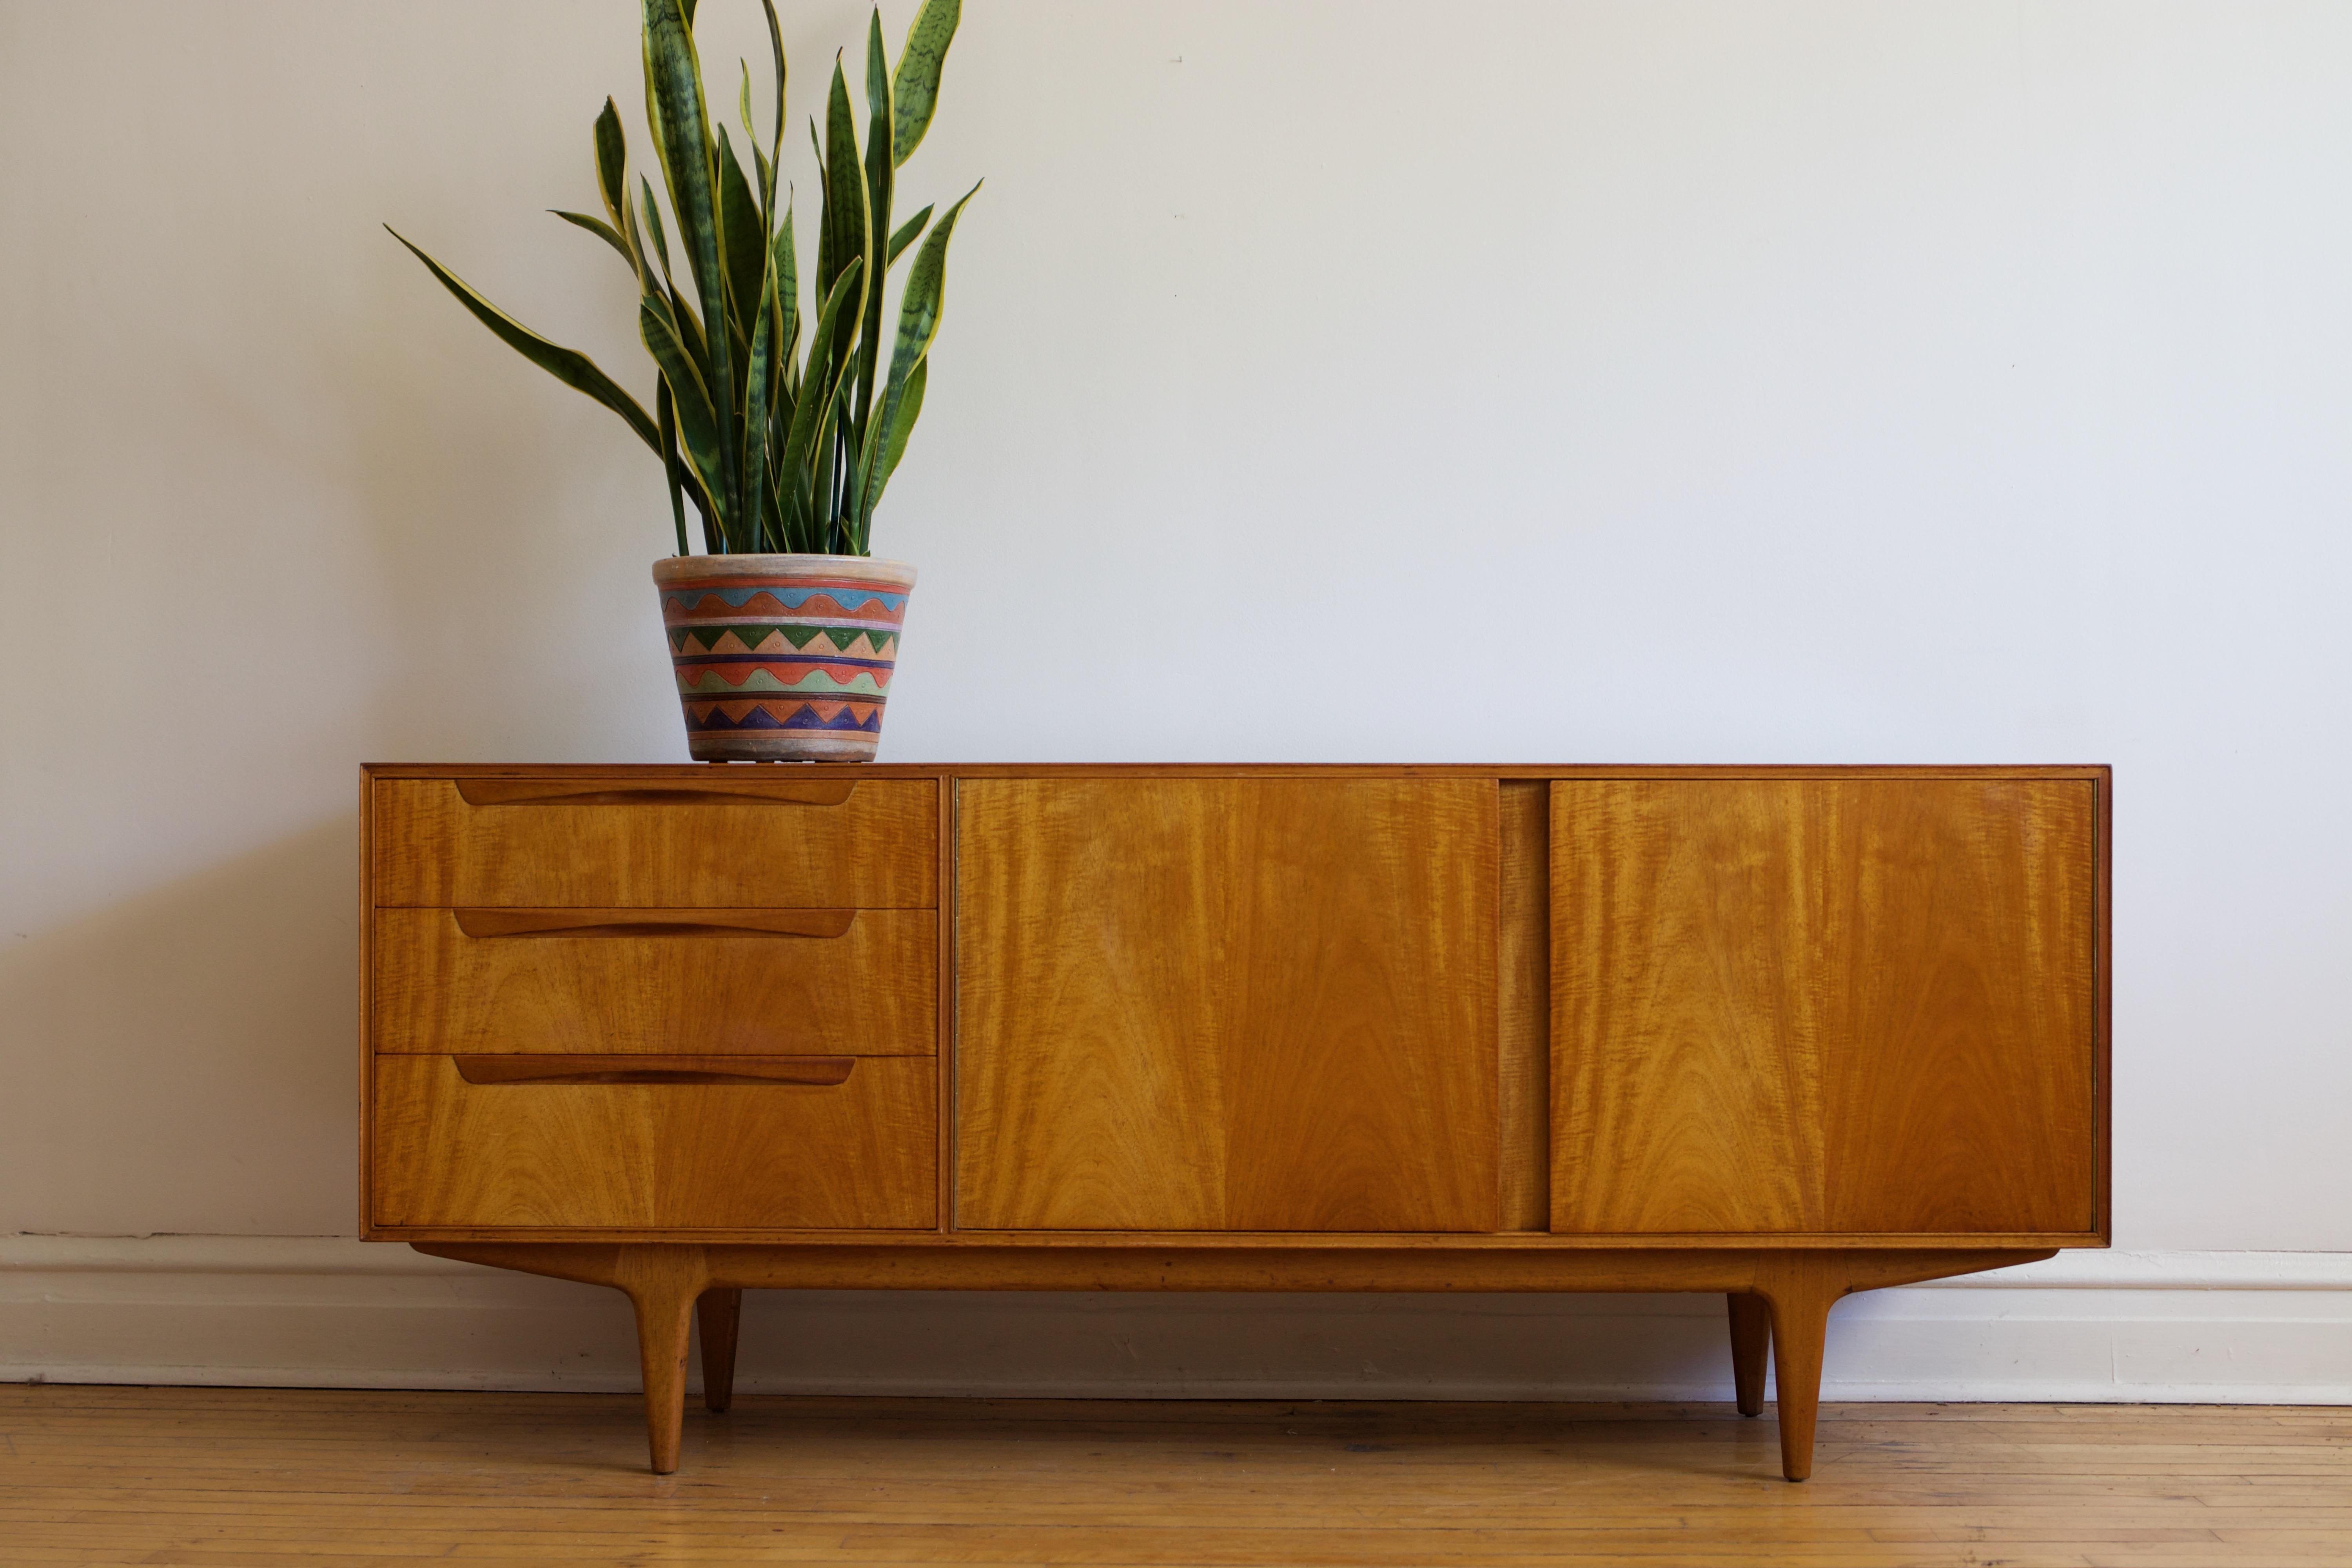 Mid-Century Modern teakwood sideboard.
Just imported from England.
Made in Scotland by McIntosh.
Three dovetailed drawers; top drawer holds dividers.
Double cabinet holds a large shelf.
Great vintage condition.

Measures: 69” long x 17 3/4”